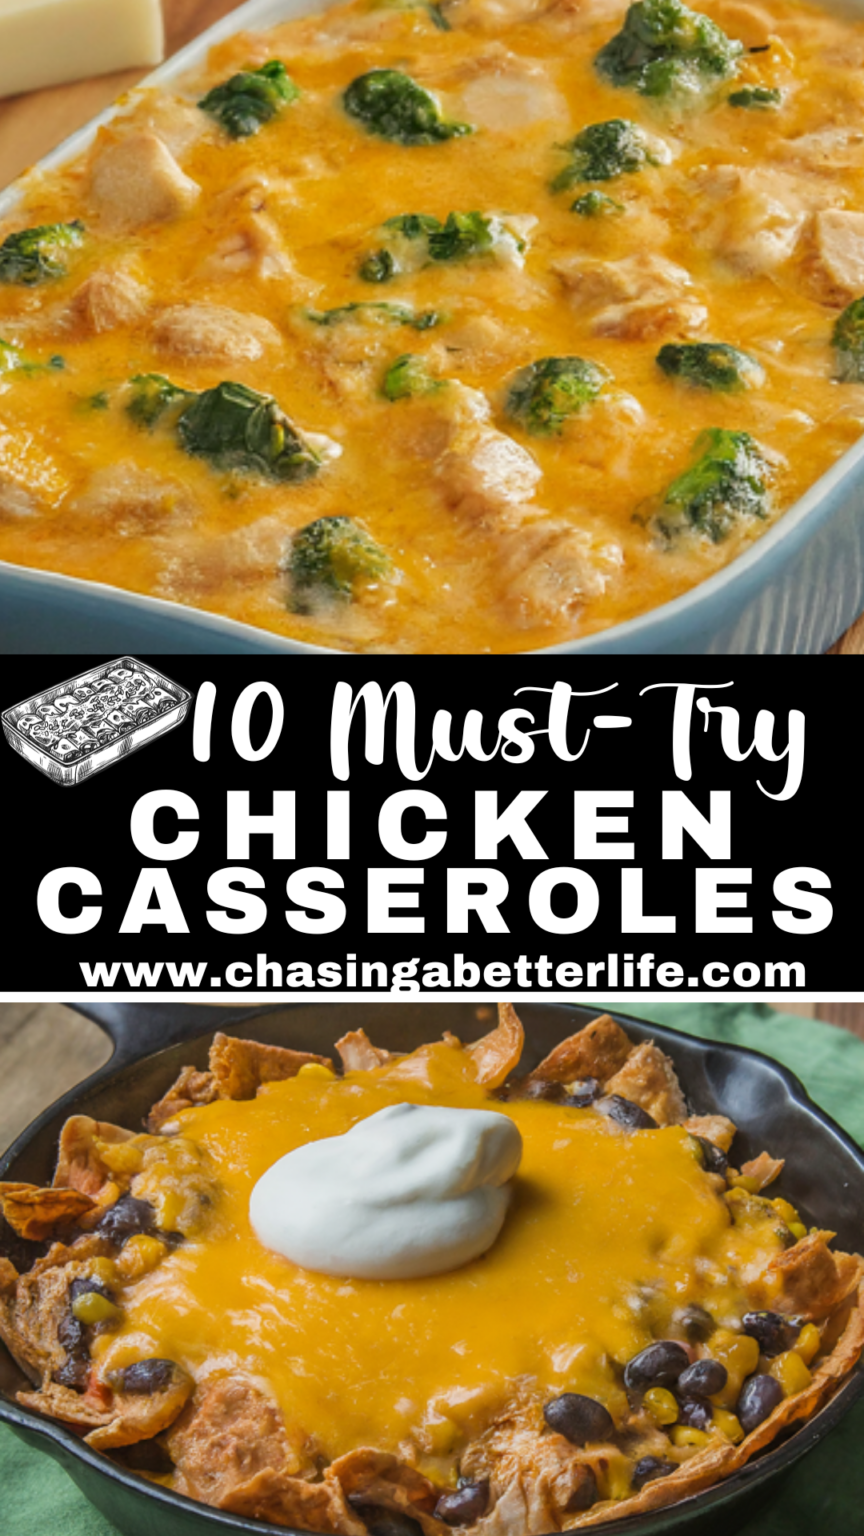 10 Irresistible Chicken Casseroles You Need to Try Right Now!